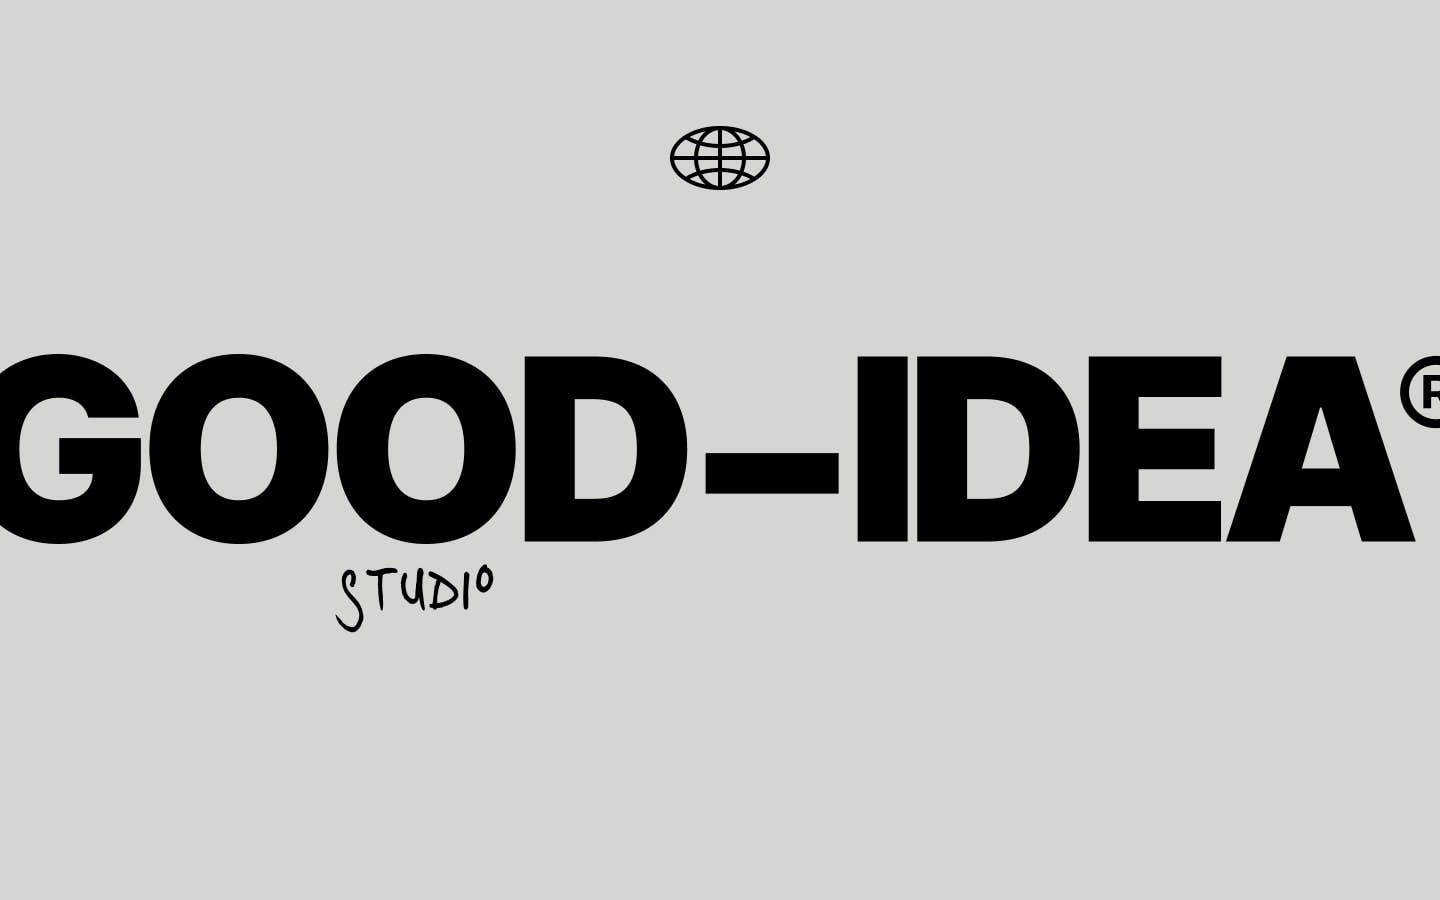 A lettermark of the brand "Good-Idea"